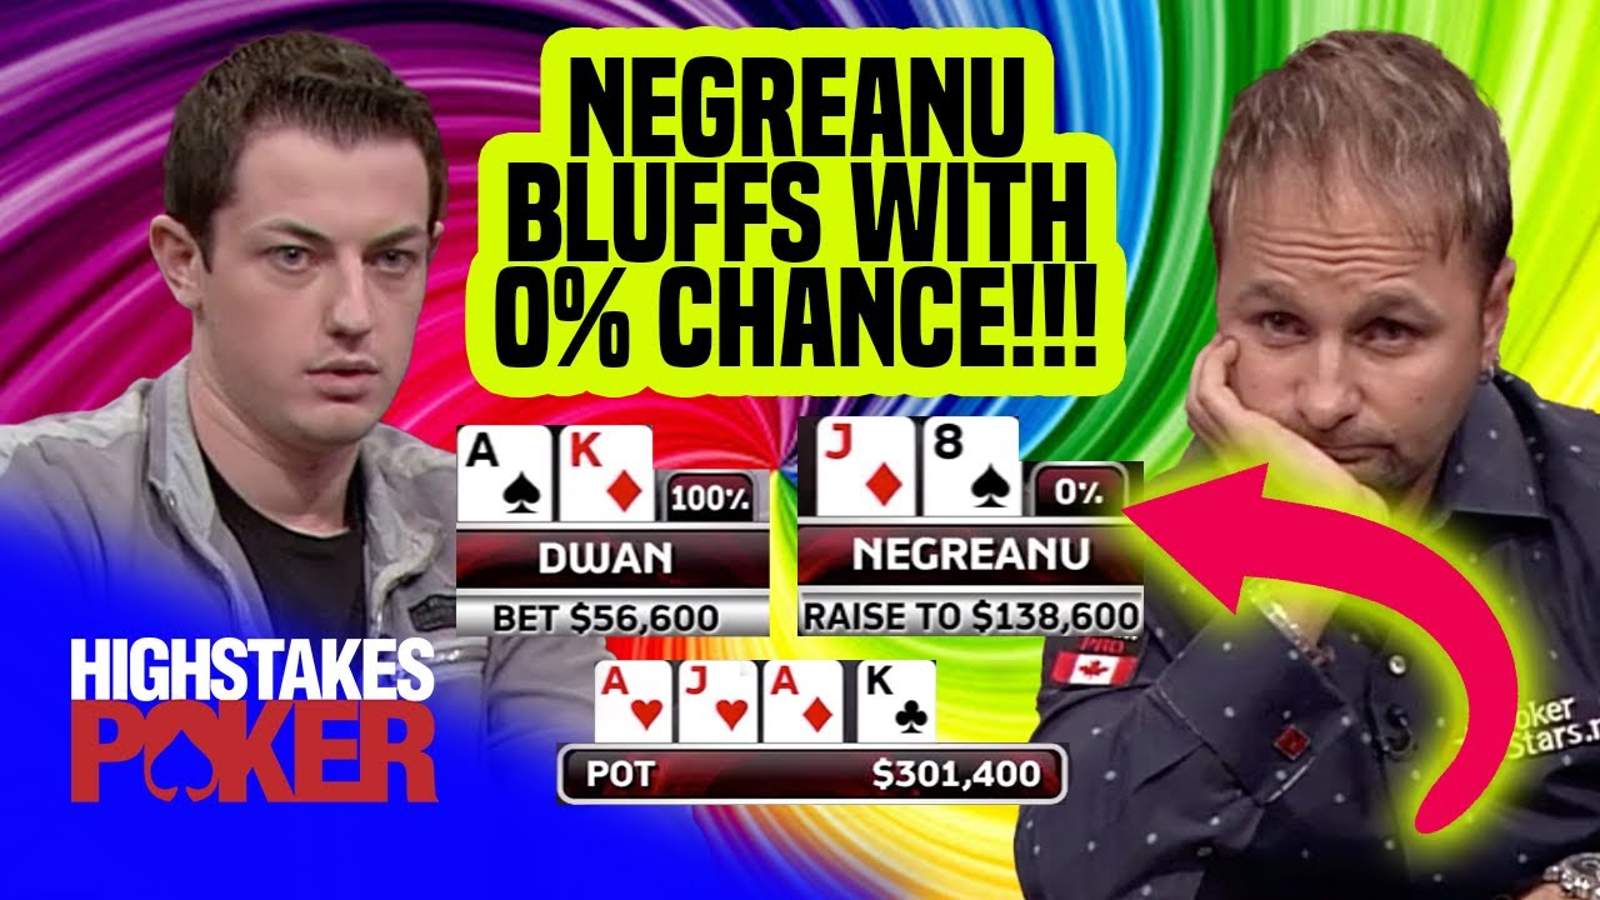 Daniel Negreanu Tries Bluffing Tom Dwan with 0% Equity - What Could Go Wrong?